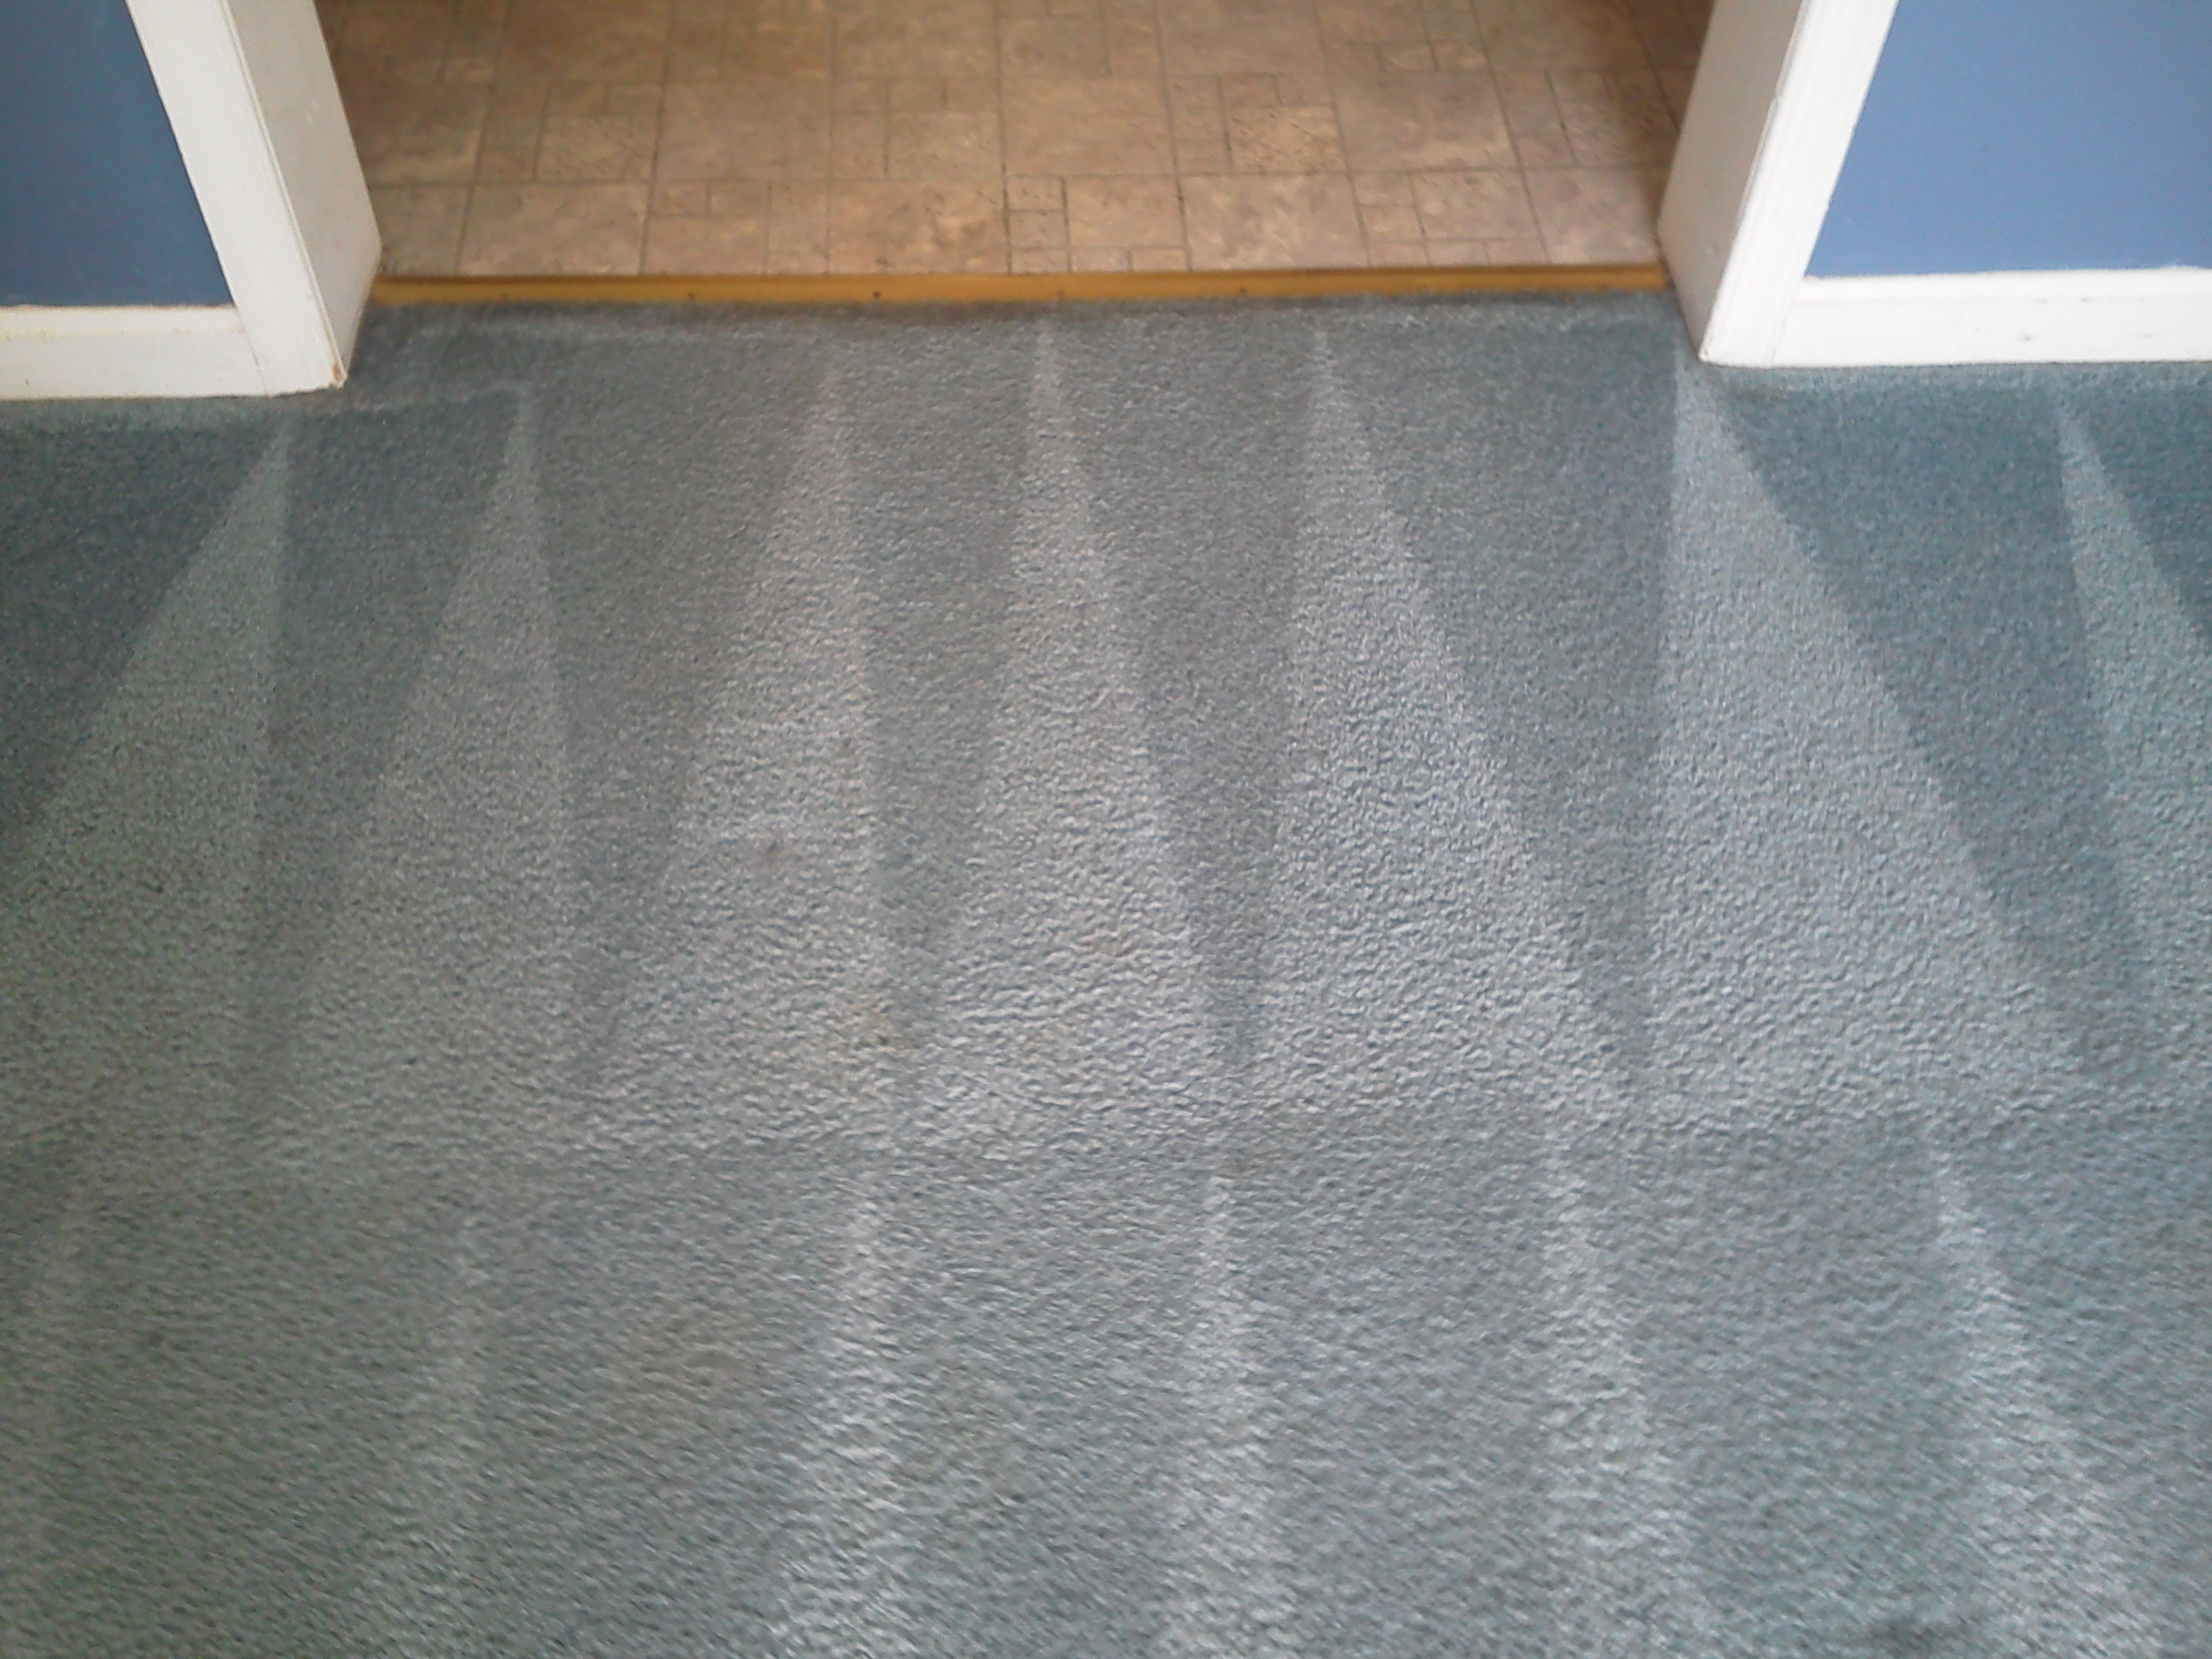 After the carpet cleaning